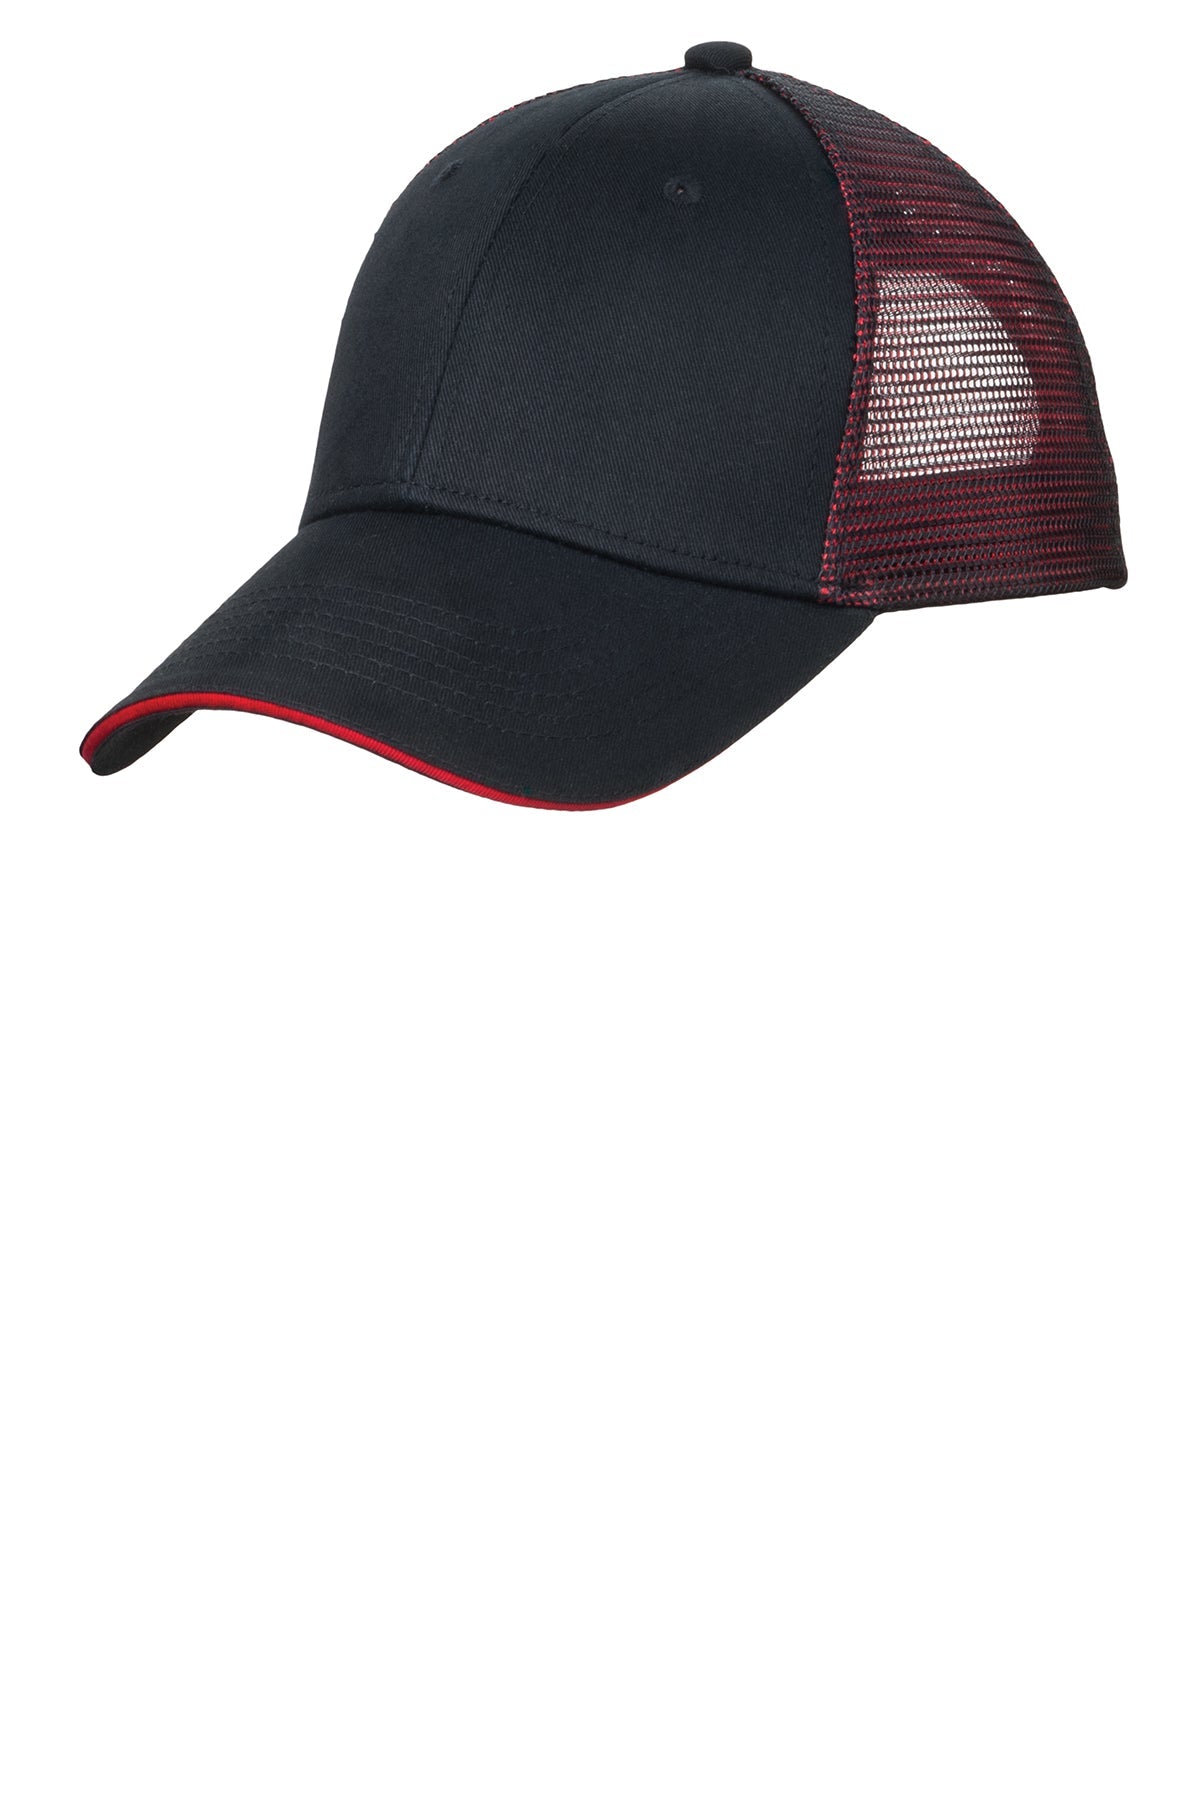 Port Authority Double Mesh Snapback Sandwich Bill Customized Caps, Black/ Red